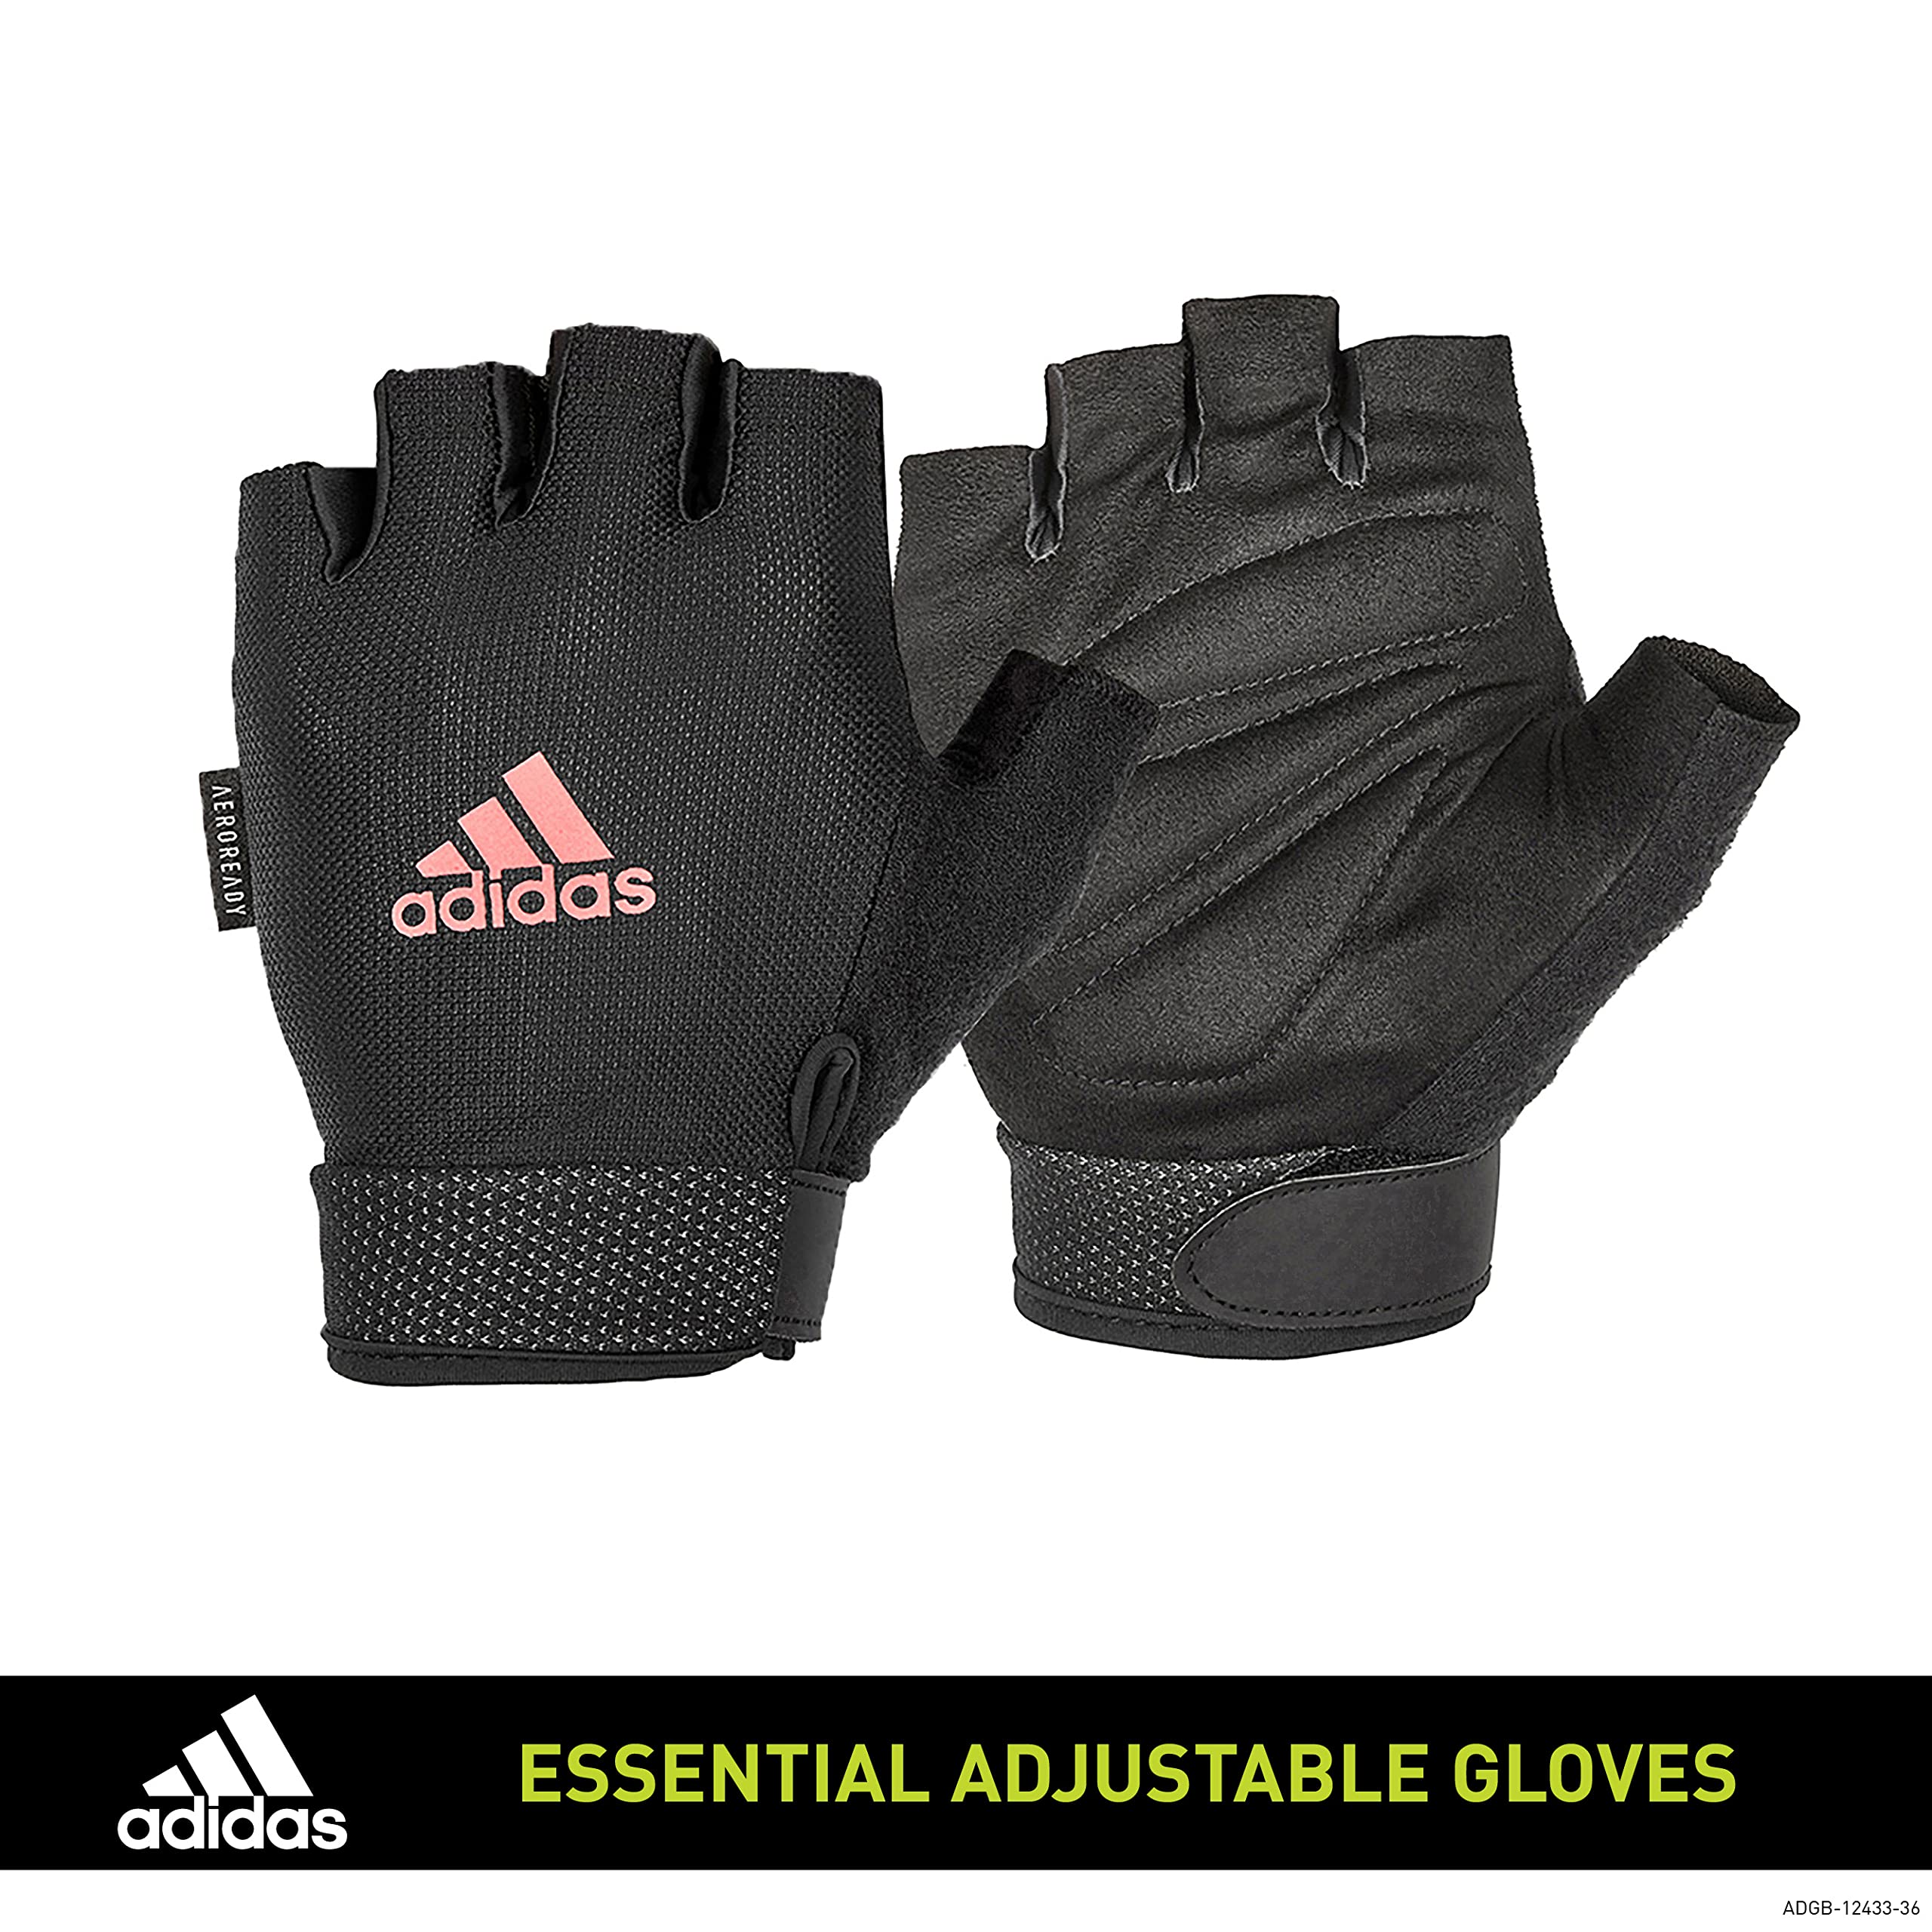 adidas Essential Adjustable Fingerless Gloves for Men and Women - Padded Weight Lifting Gloves - Adjustable Wrist Straps for Tailored, Secure Fit